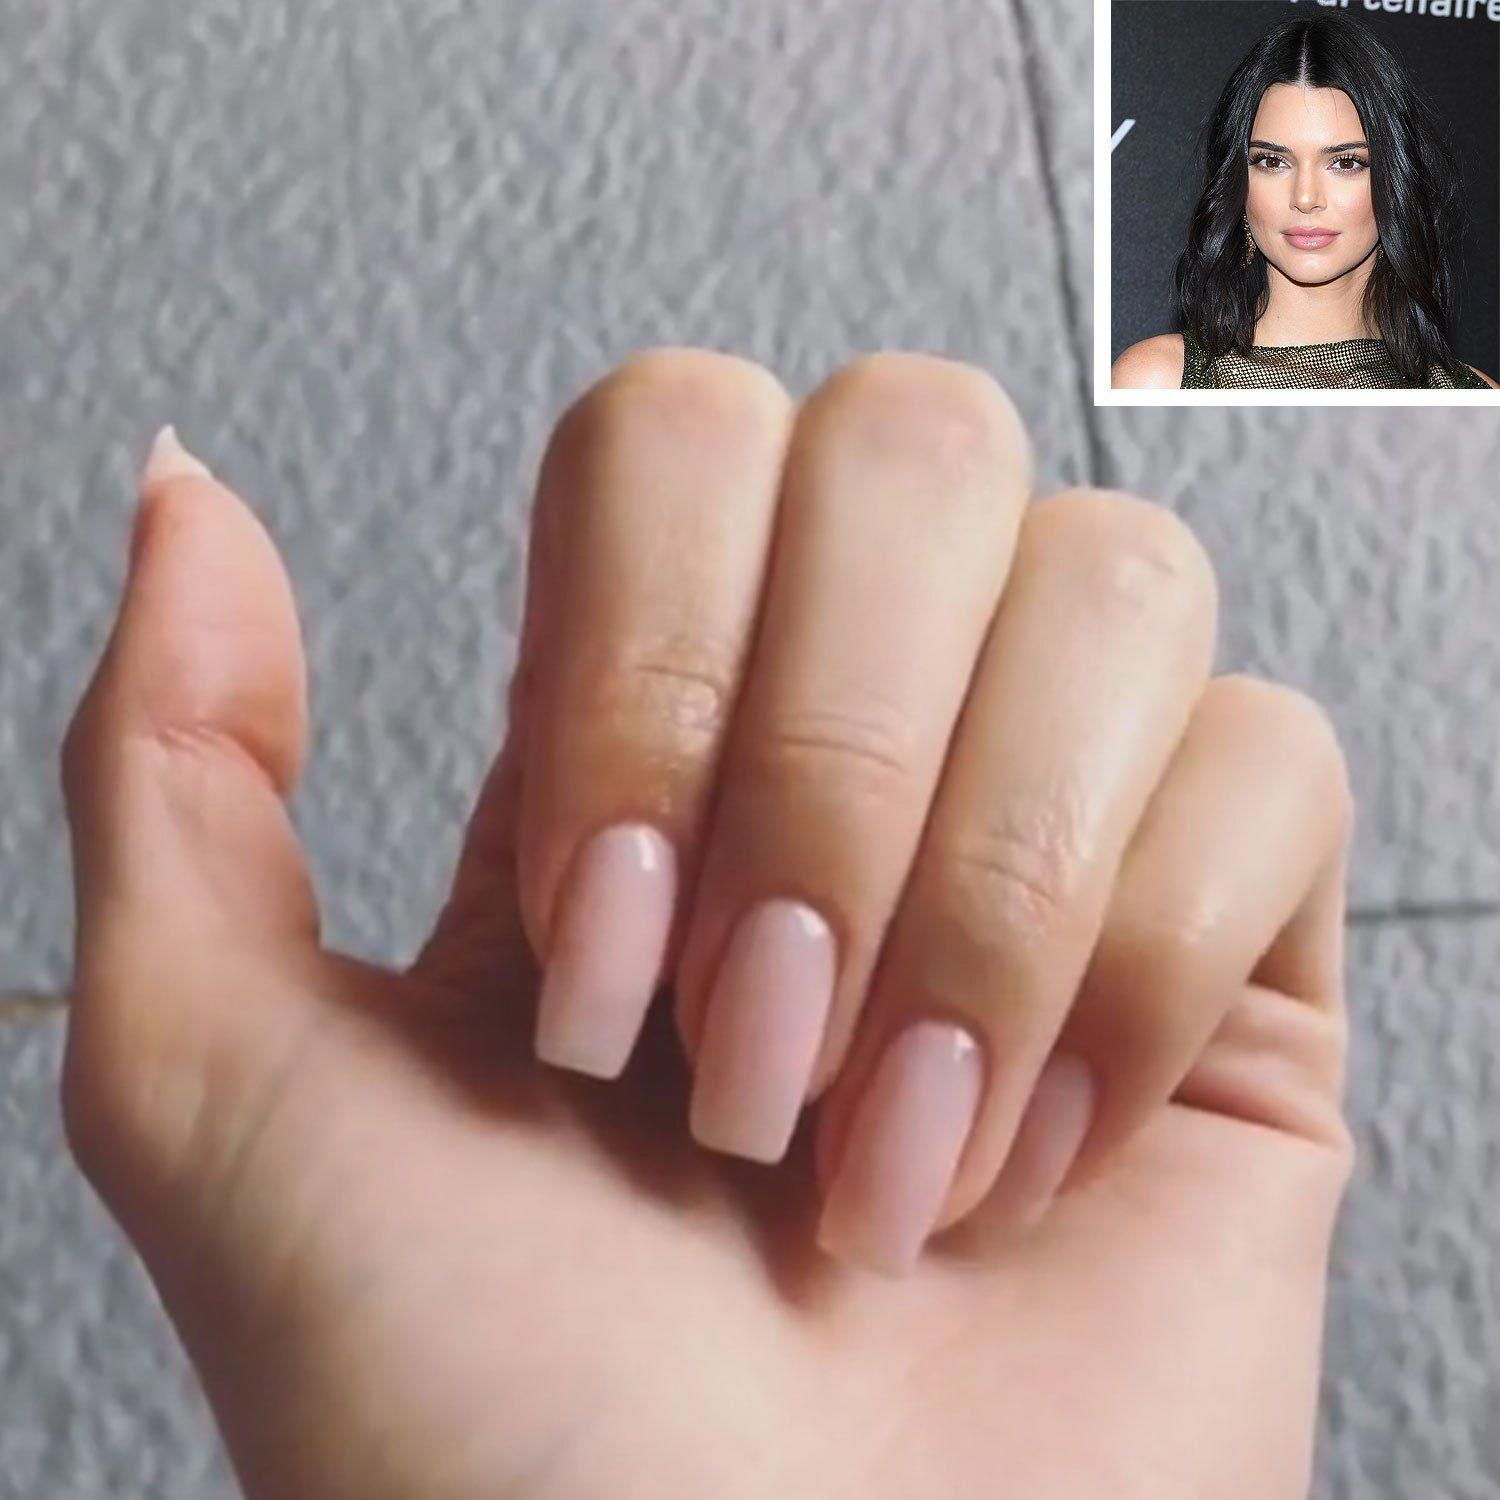 Kendall Jenner Gets Long Acrylic Nails Just Like Sister Kylie Jenner (After Once Calling Her Out!) - Kendall Jenner Gets Long Acrylic Nails Just Like Sister Kylie Jenner (After Once Calling Her Out!) -   17 beauty Nails long ideas